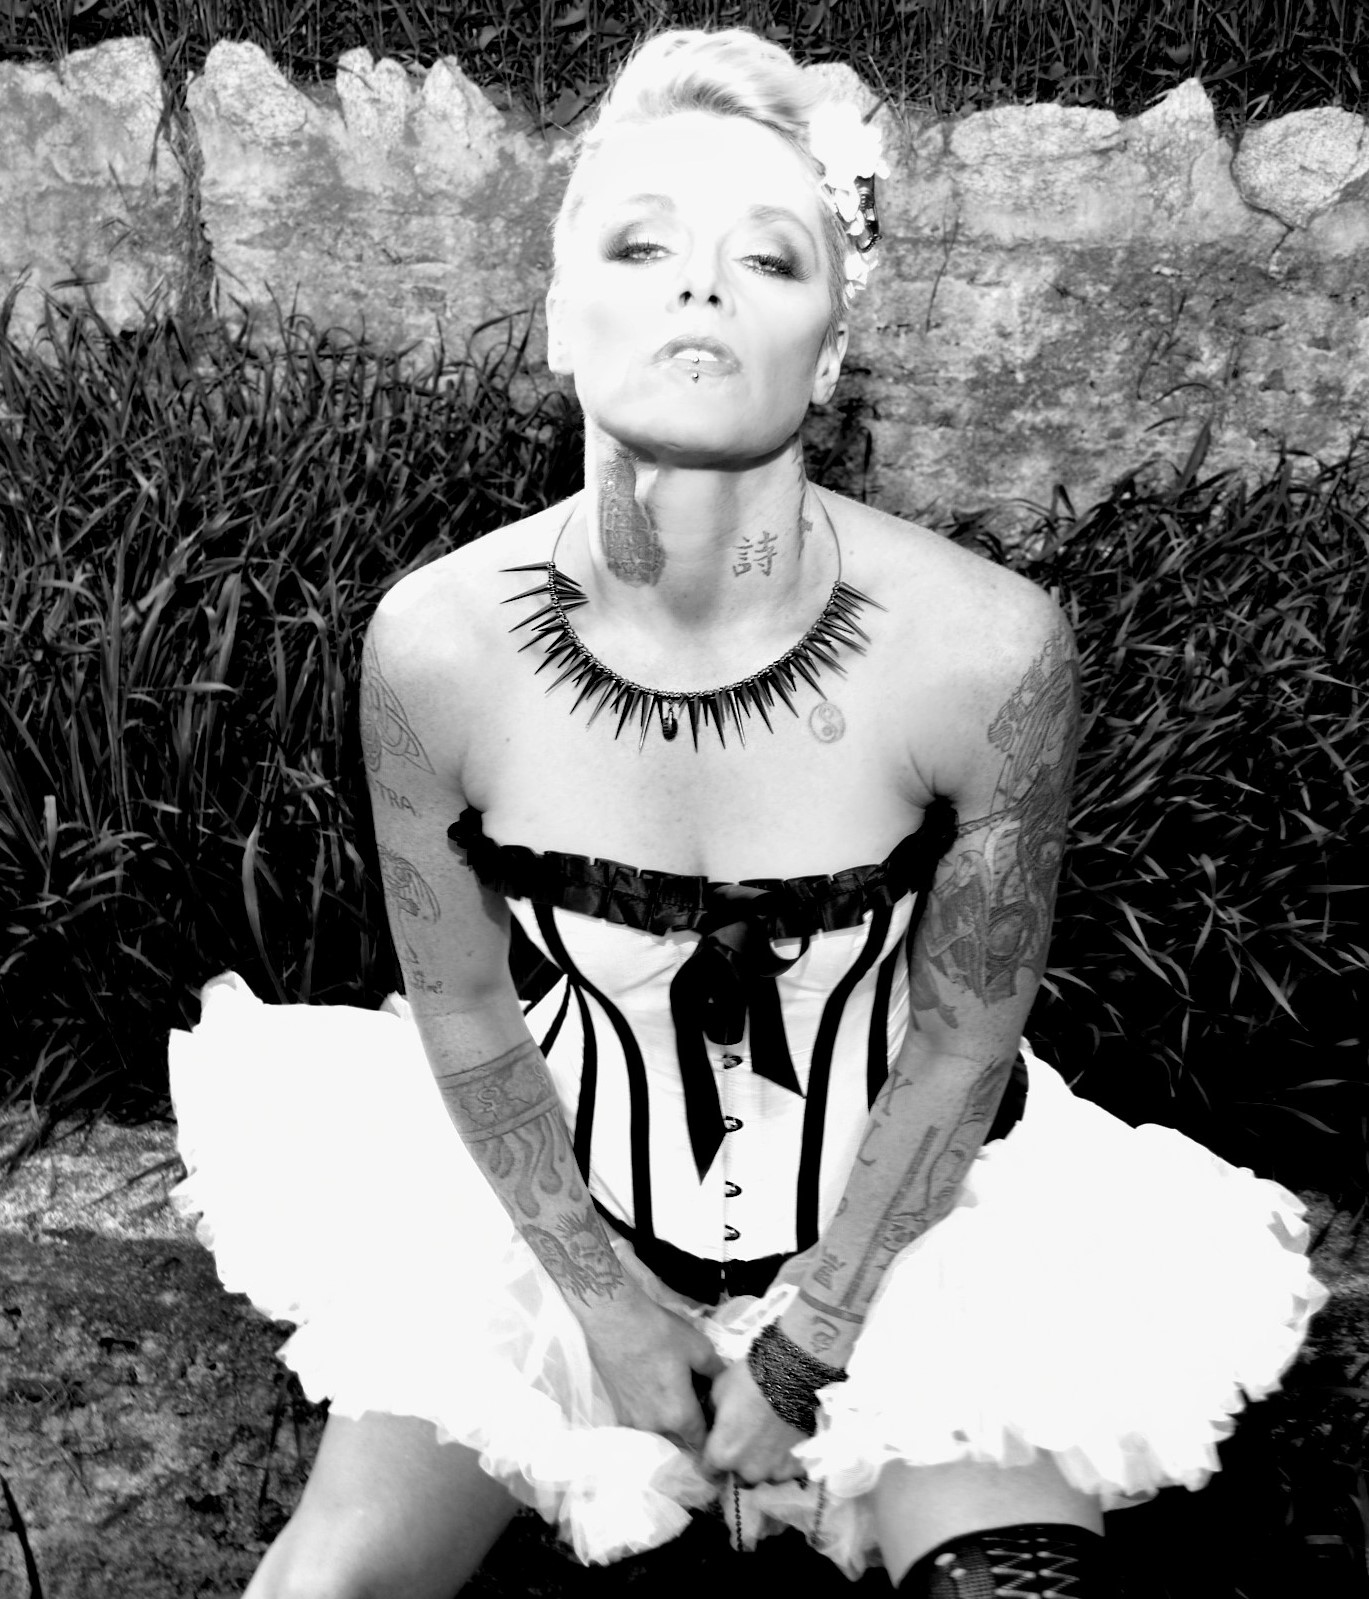 OTEP Signs With Napalm Records - New Album Due Out Spring 2016